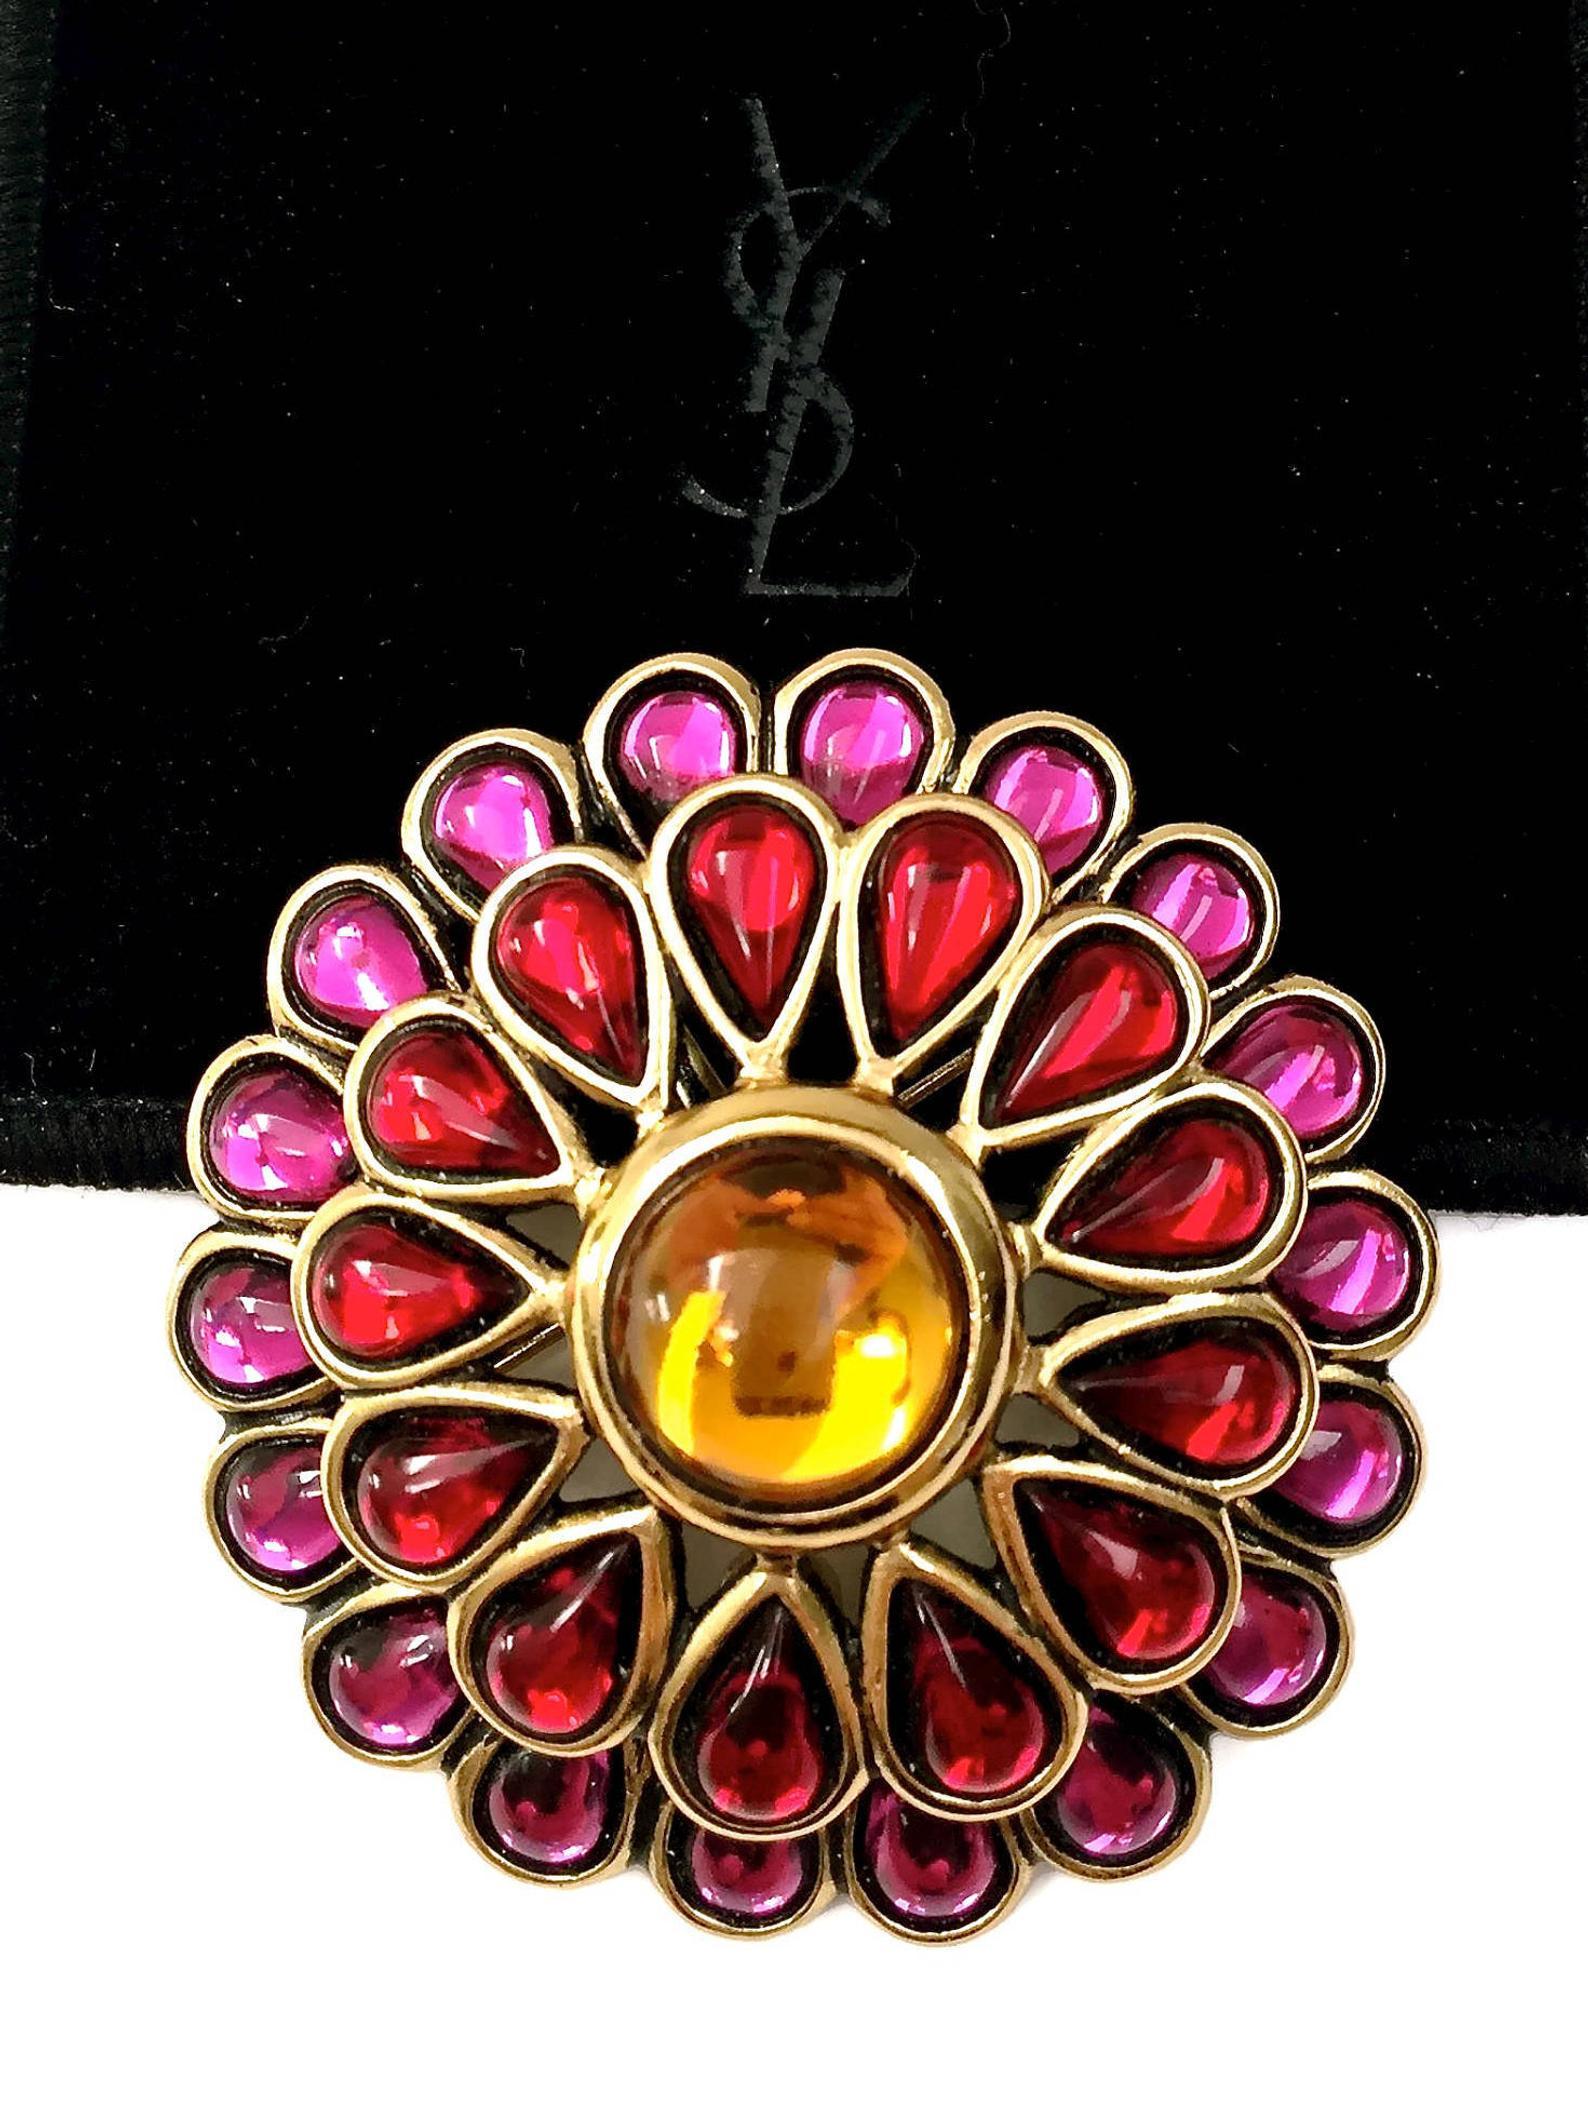 Vintage YSL Yves Saint Laurent Dome Flower Glass Pendant Brooch

Measurements:
Height: 2.16 inches (5.5 cm)
Width: 2.16 inches (5.5 cm)
Thickness: 7.8 inch (2 cm)

Features:
- 100% Authentic YVES SAINT LAURENT.
- Round dome studded with coloured